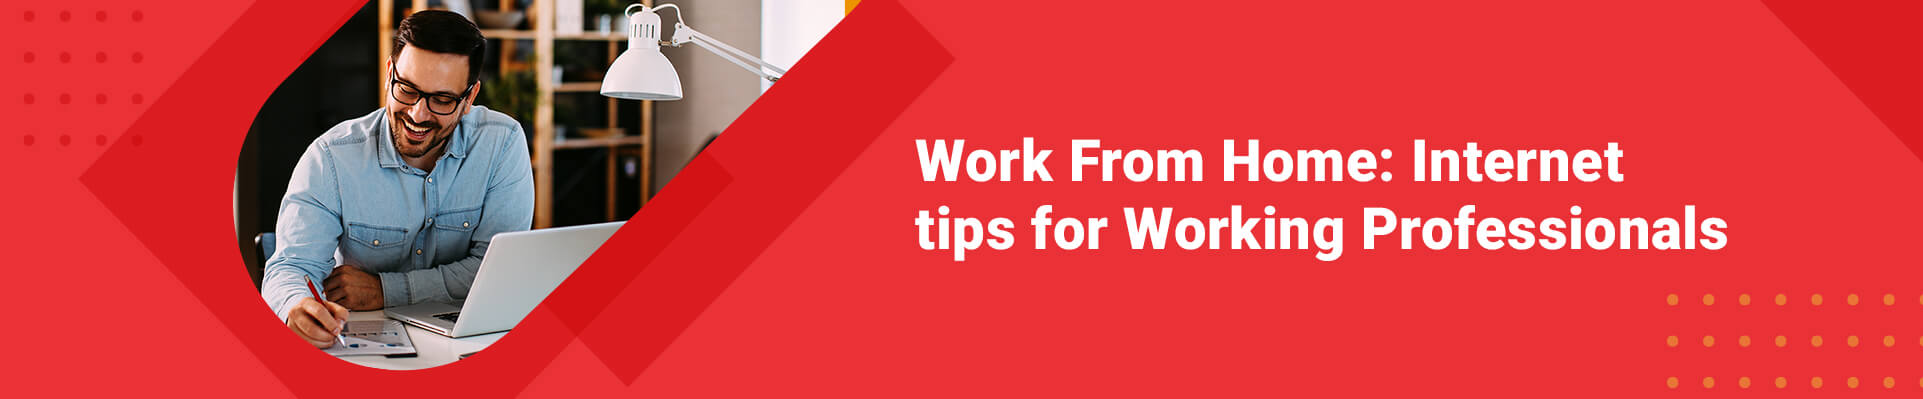 Work From Home: Internet tips for Working Professionals